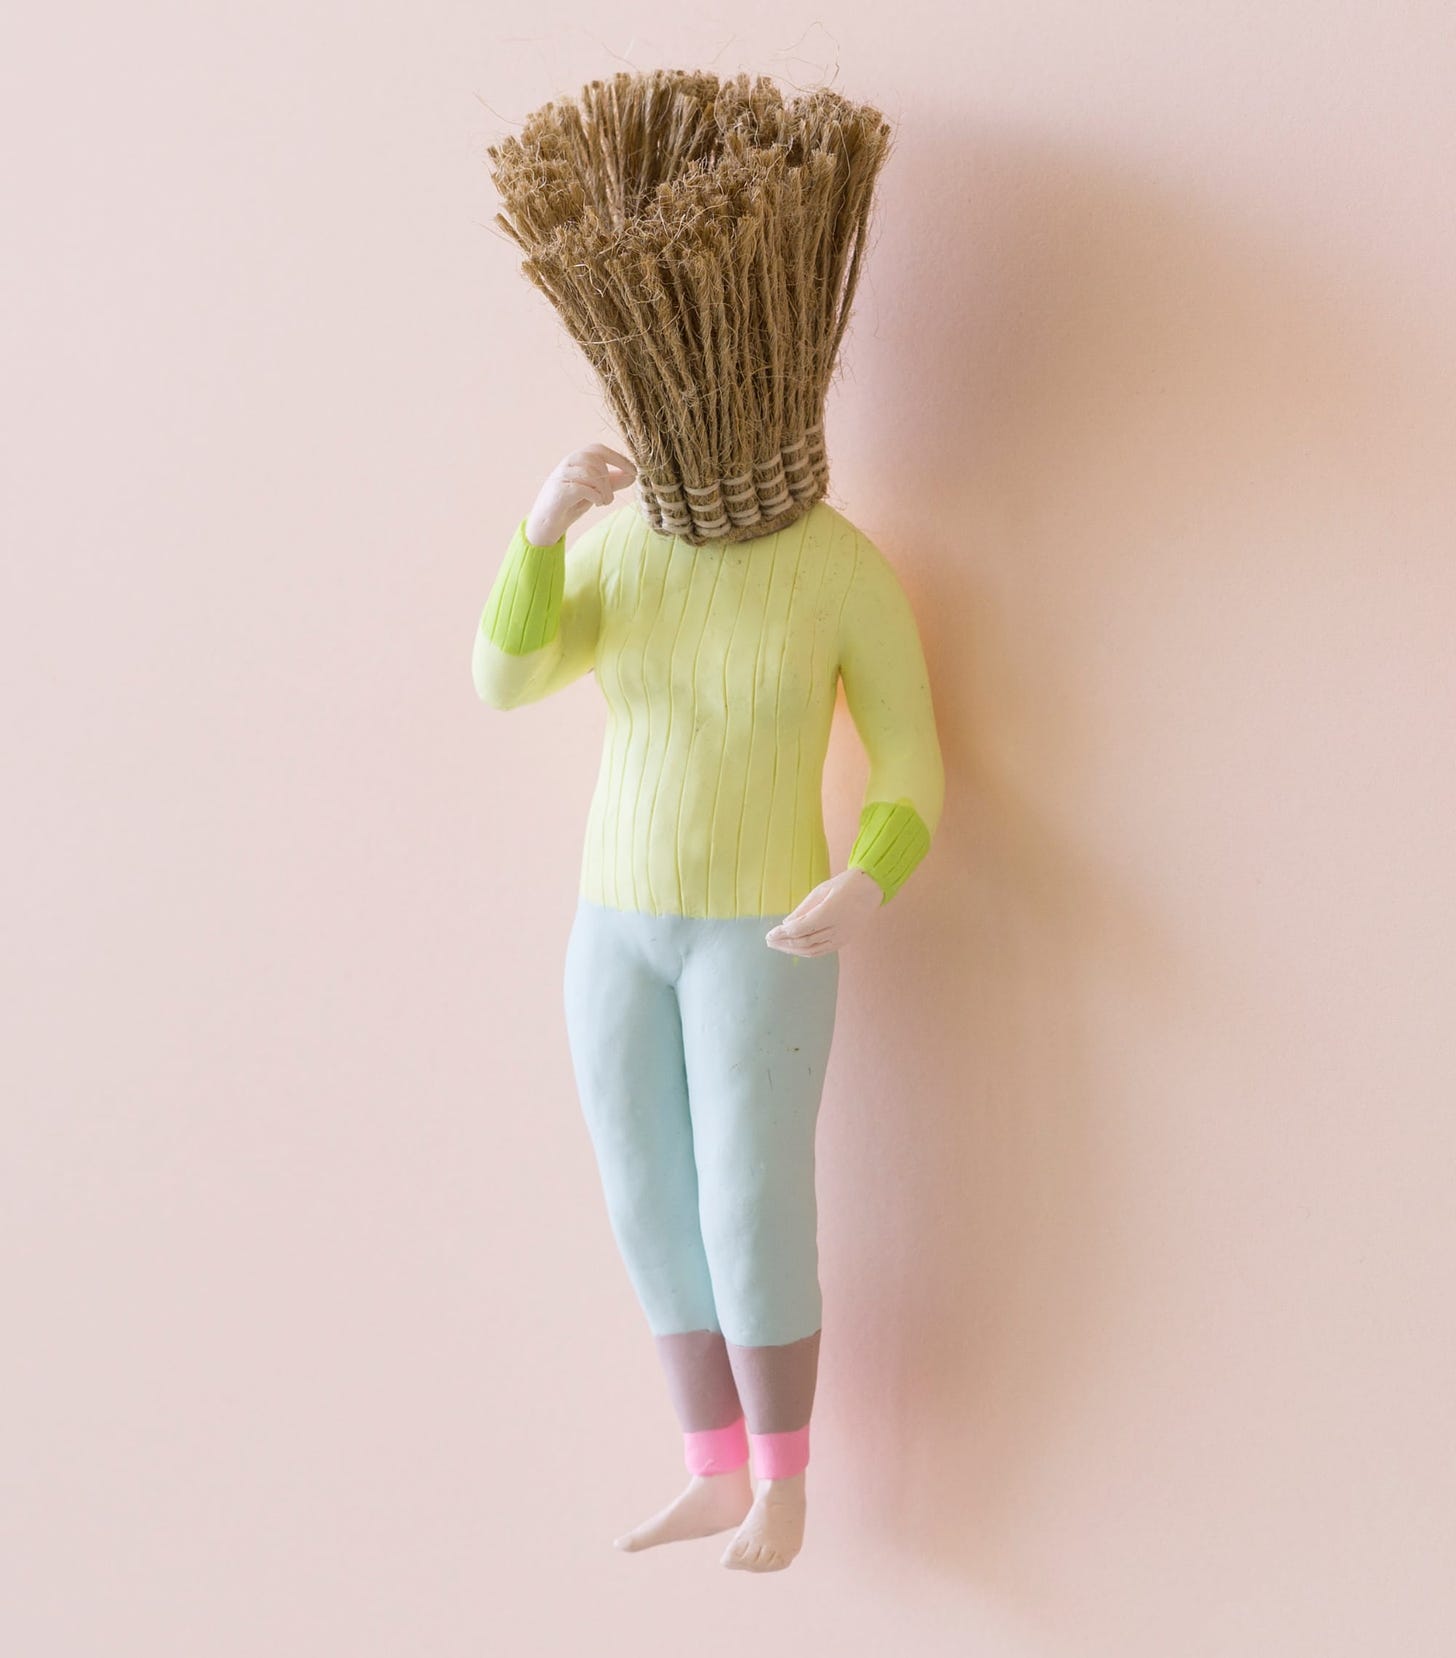 A Daily Sculpture Project by Frode Bolhius Spawns a Quirky Colorful Cast of  Tiny Figures — Colossal